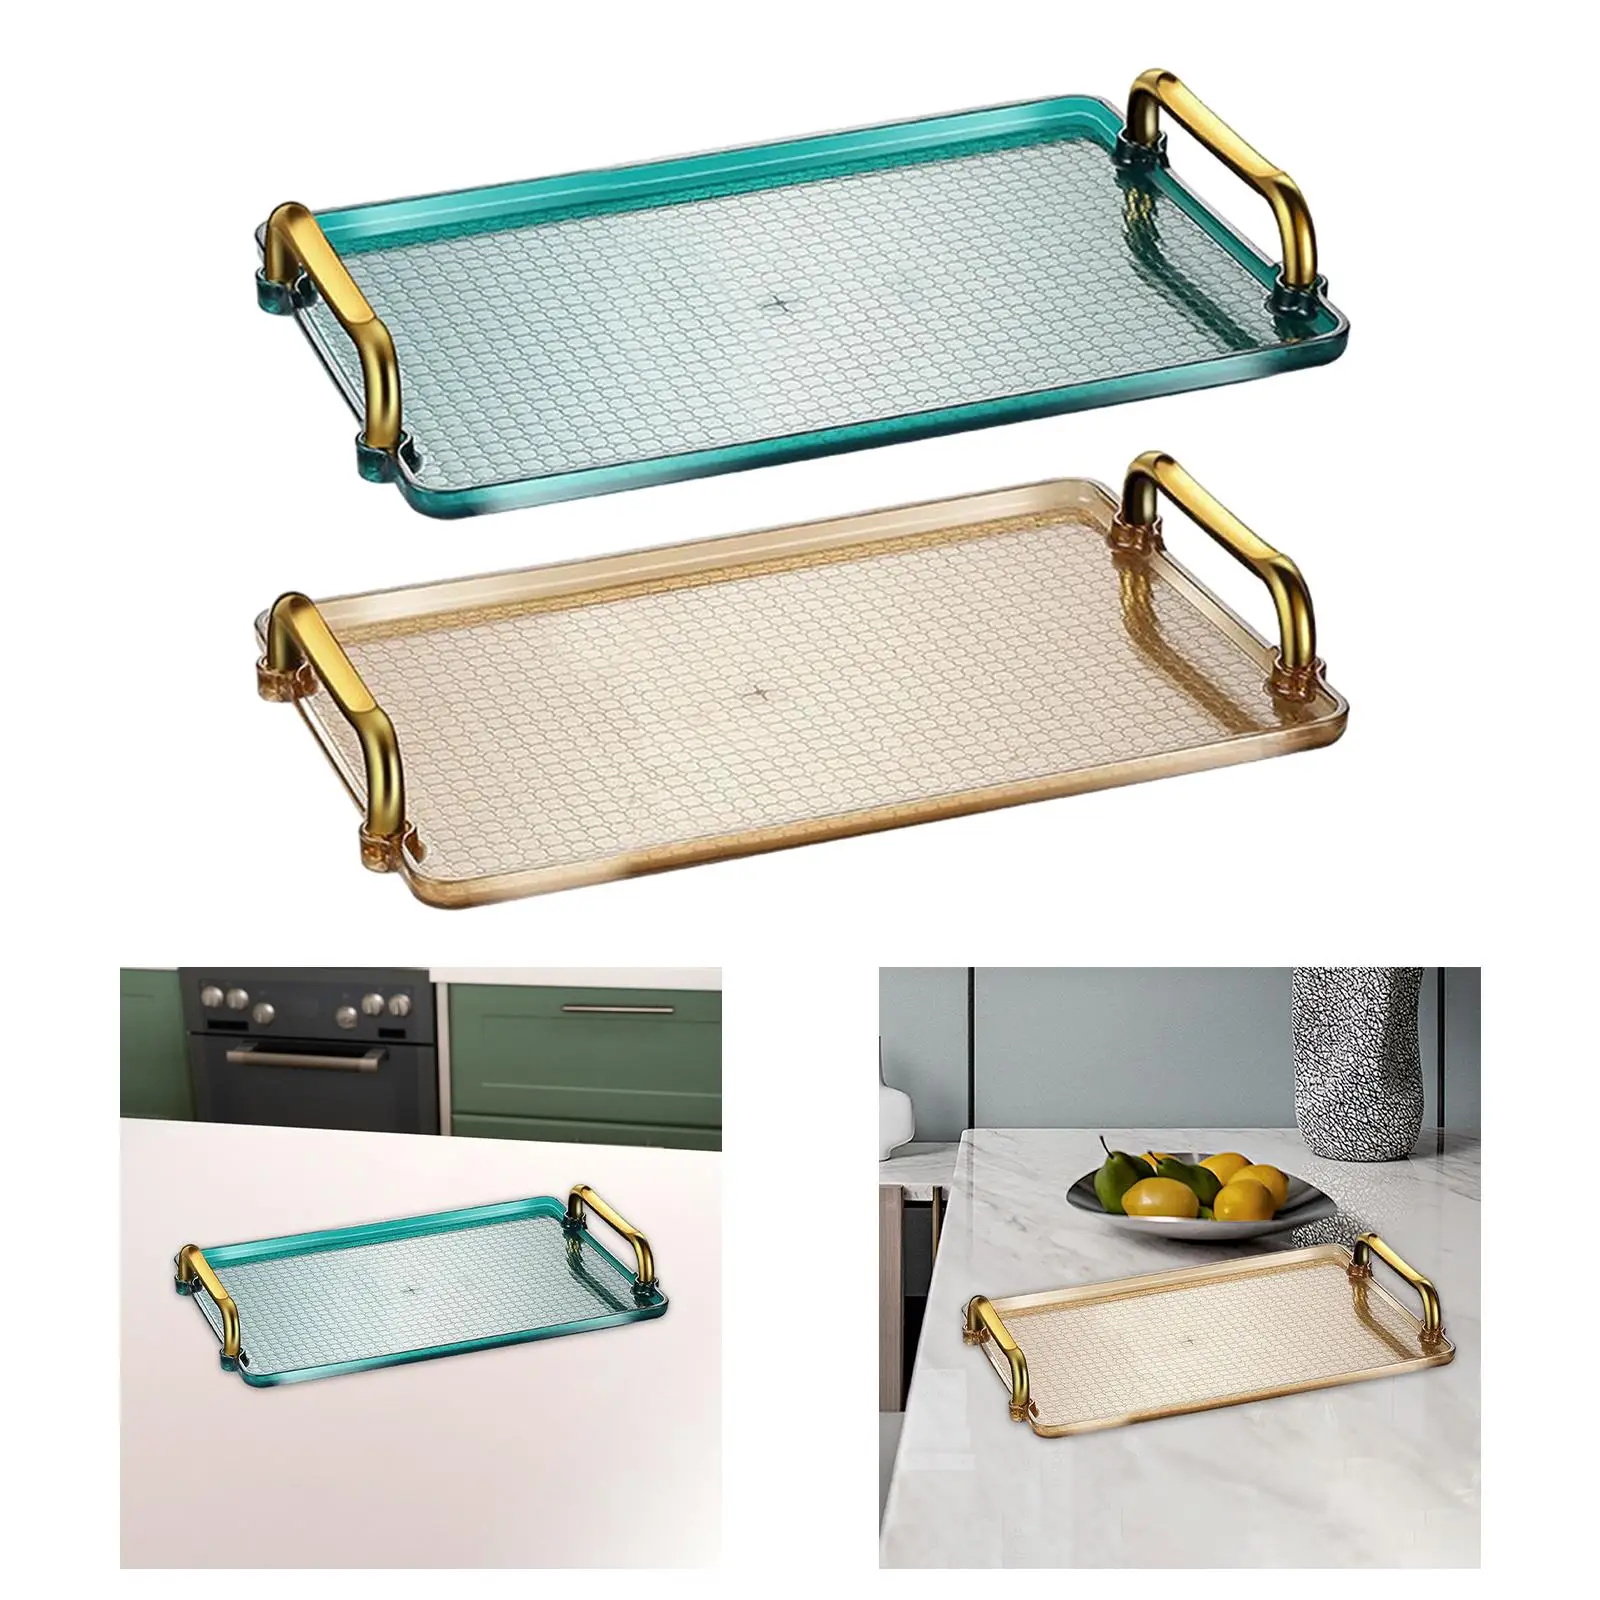 Serving Tray Platter Housewarming Gift for Bar, Kitchen, Dining Room Multipurpose Sturdy Decorative Sofa Couch Tray Ottoman Tray